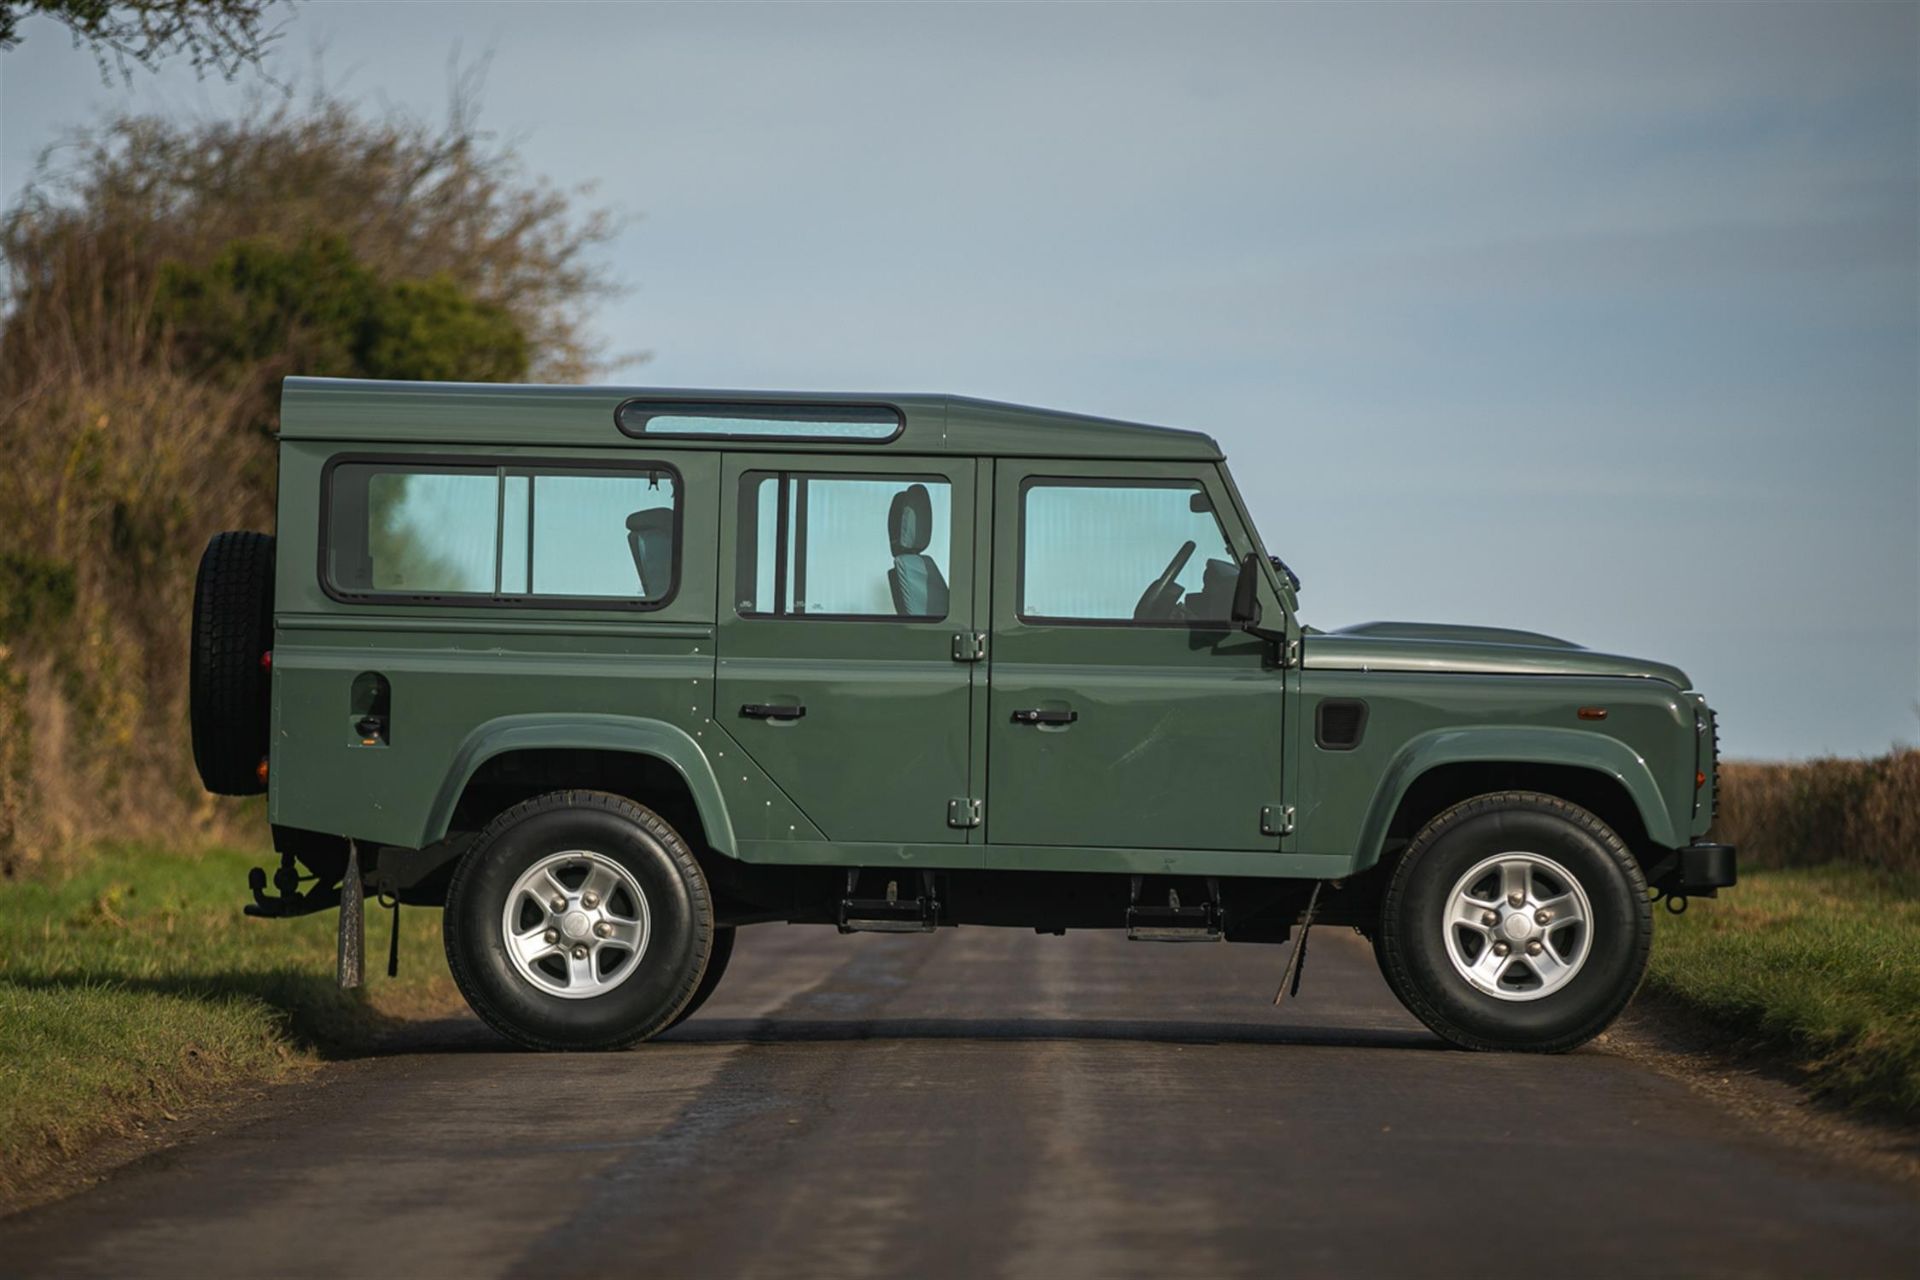 2010 Land Rover Defender 110 County - 15,623 Miles Previously used by HRH The Duke of Edinburgh - Image 5 of 10